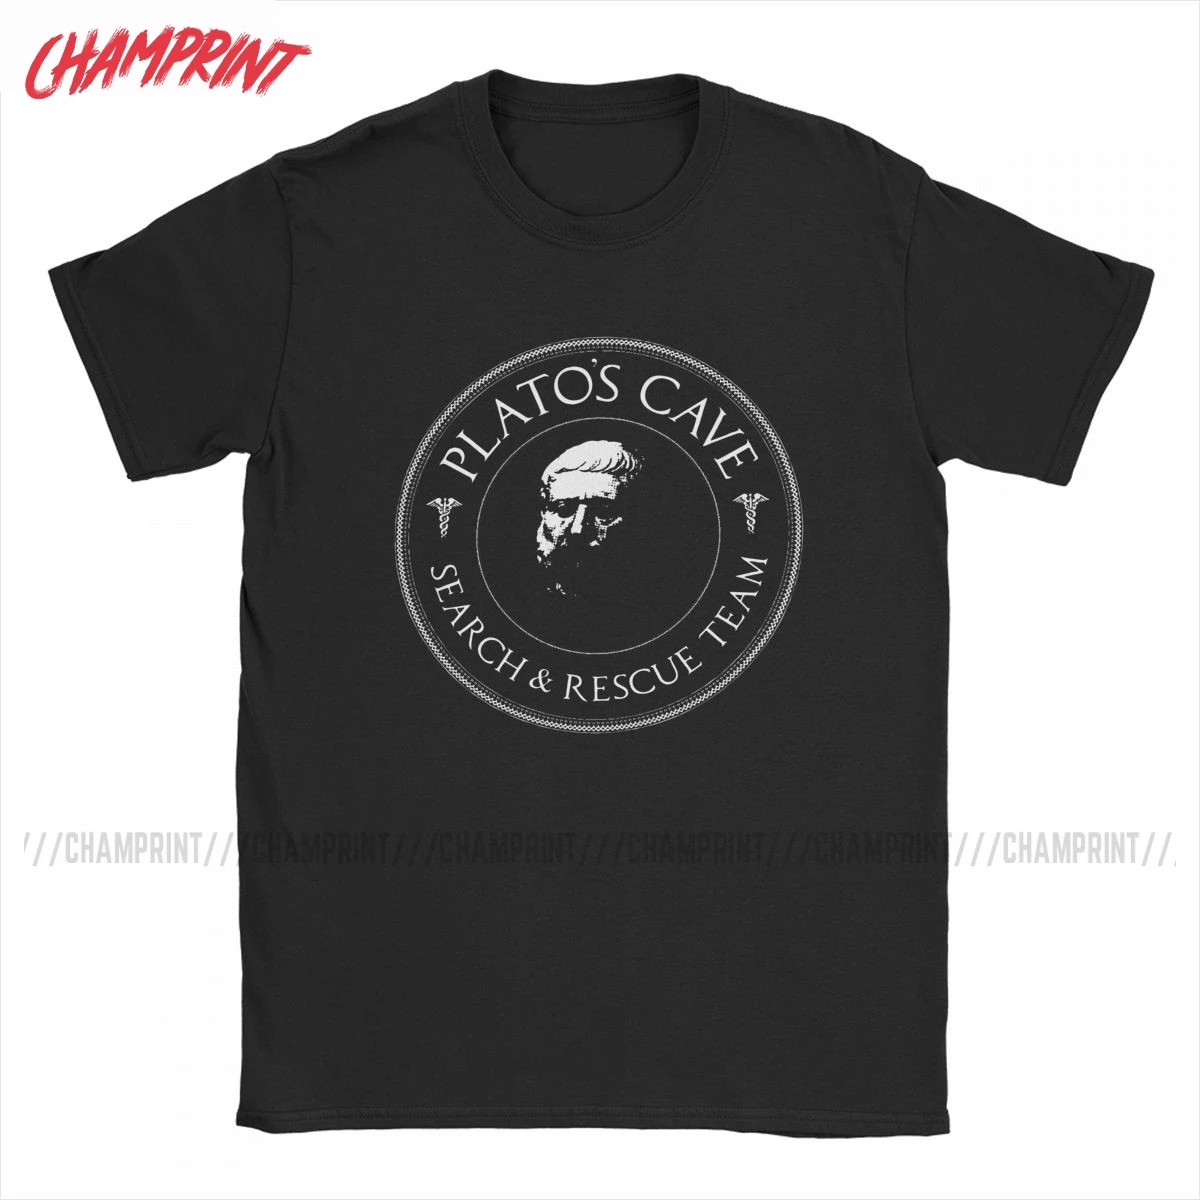 

Plato's Cave Rescue Team Philosophy T-Shirt for Men Funny Pure Cotton Tee Shirt Round Collar Short Sleeve T Shirts Gift Tops